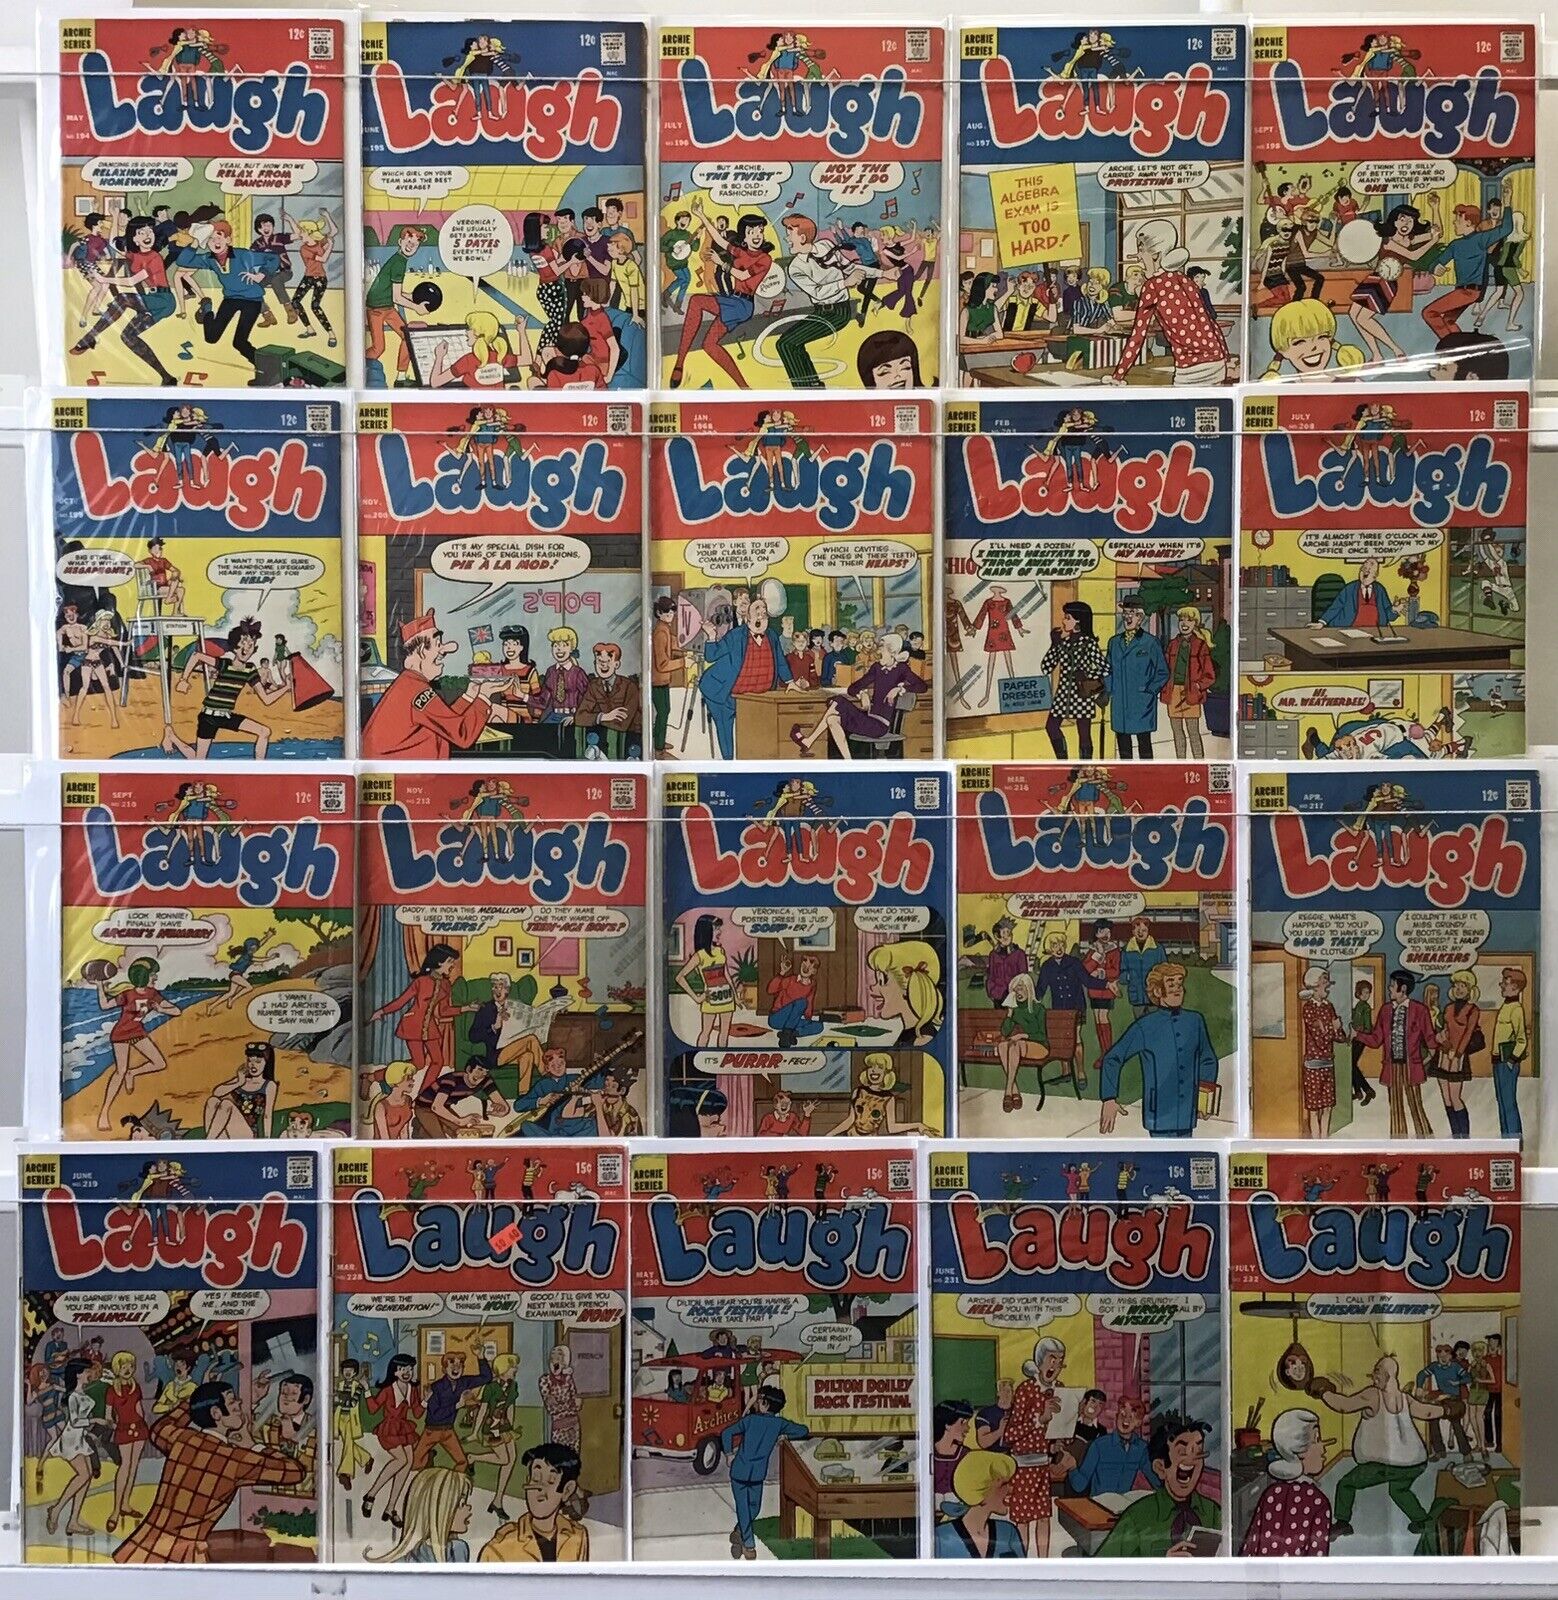 Archie Series - Vintage Laugh 15 Cents Or Less - Comic Book Lot Of 20